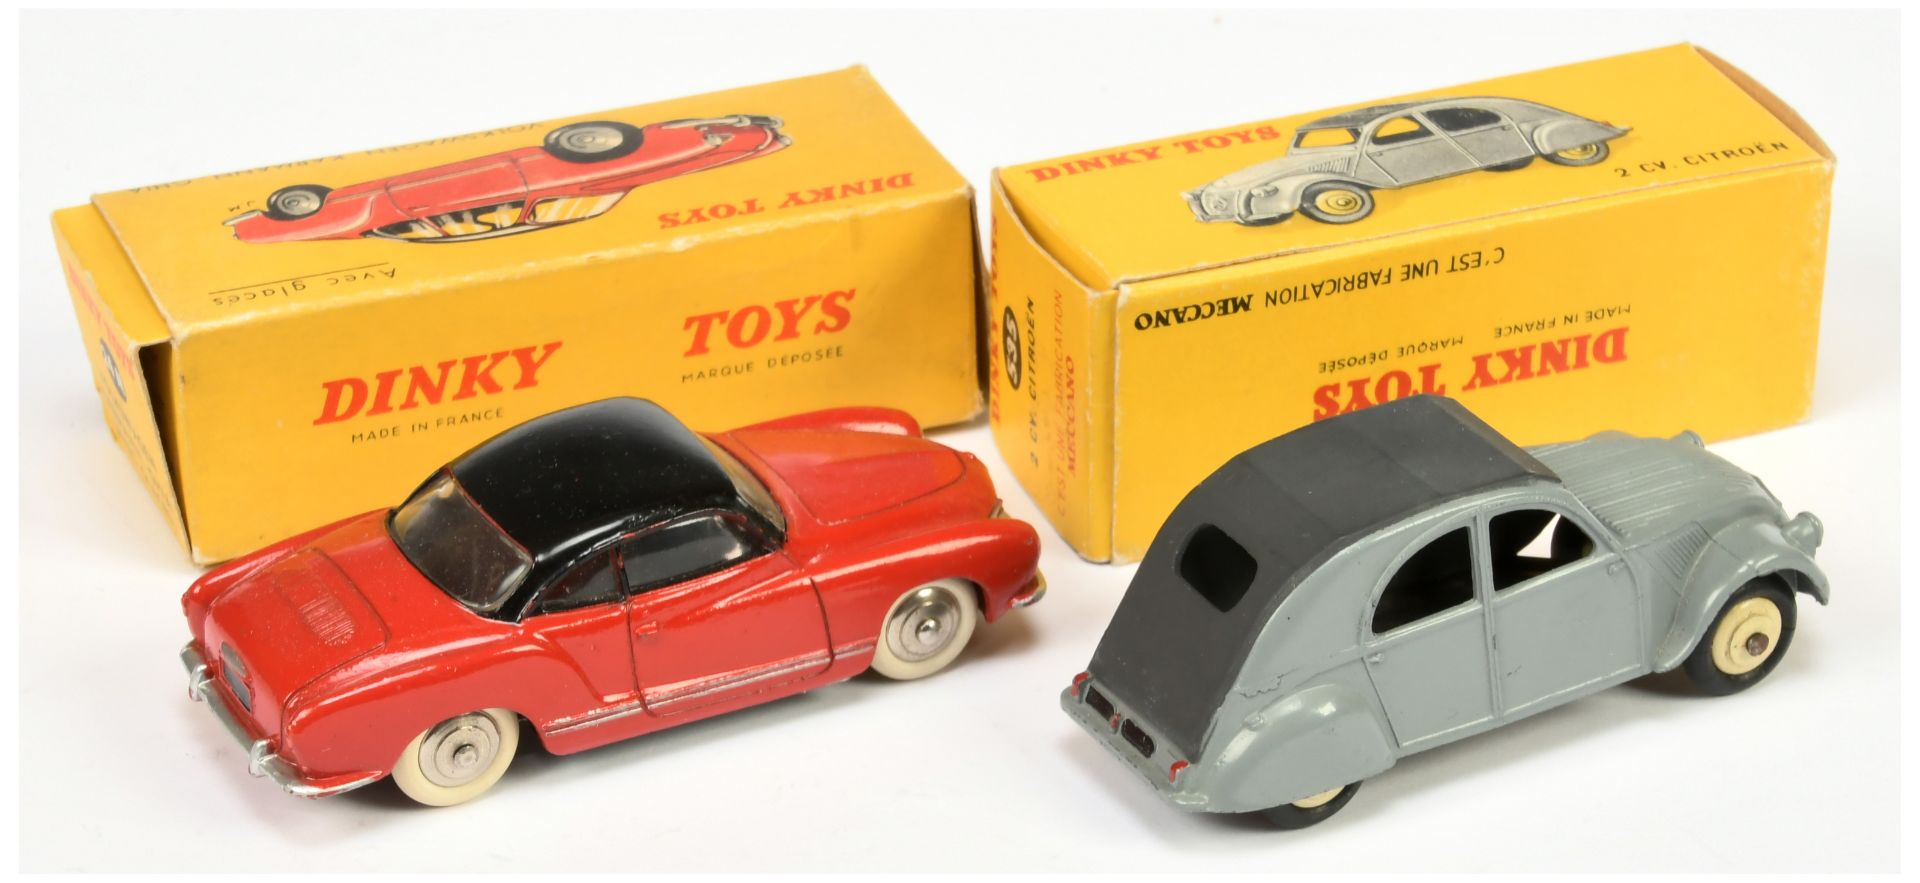 French Dinky Toys 24M Volkswagen Karmann Ghia - Red with black roof, chrome convex hubs with whit... - Image 2 of 2